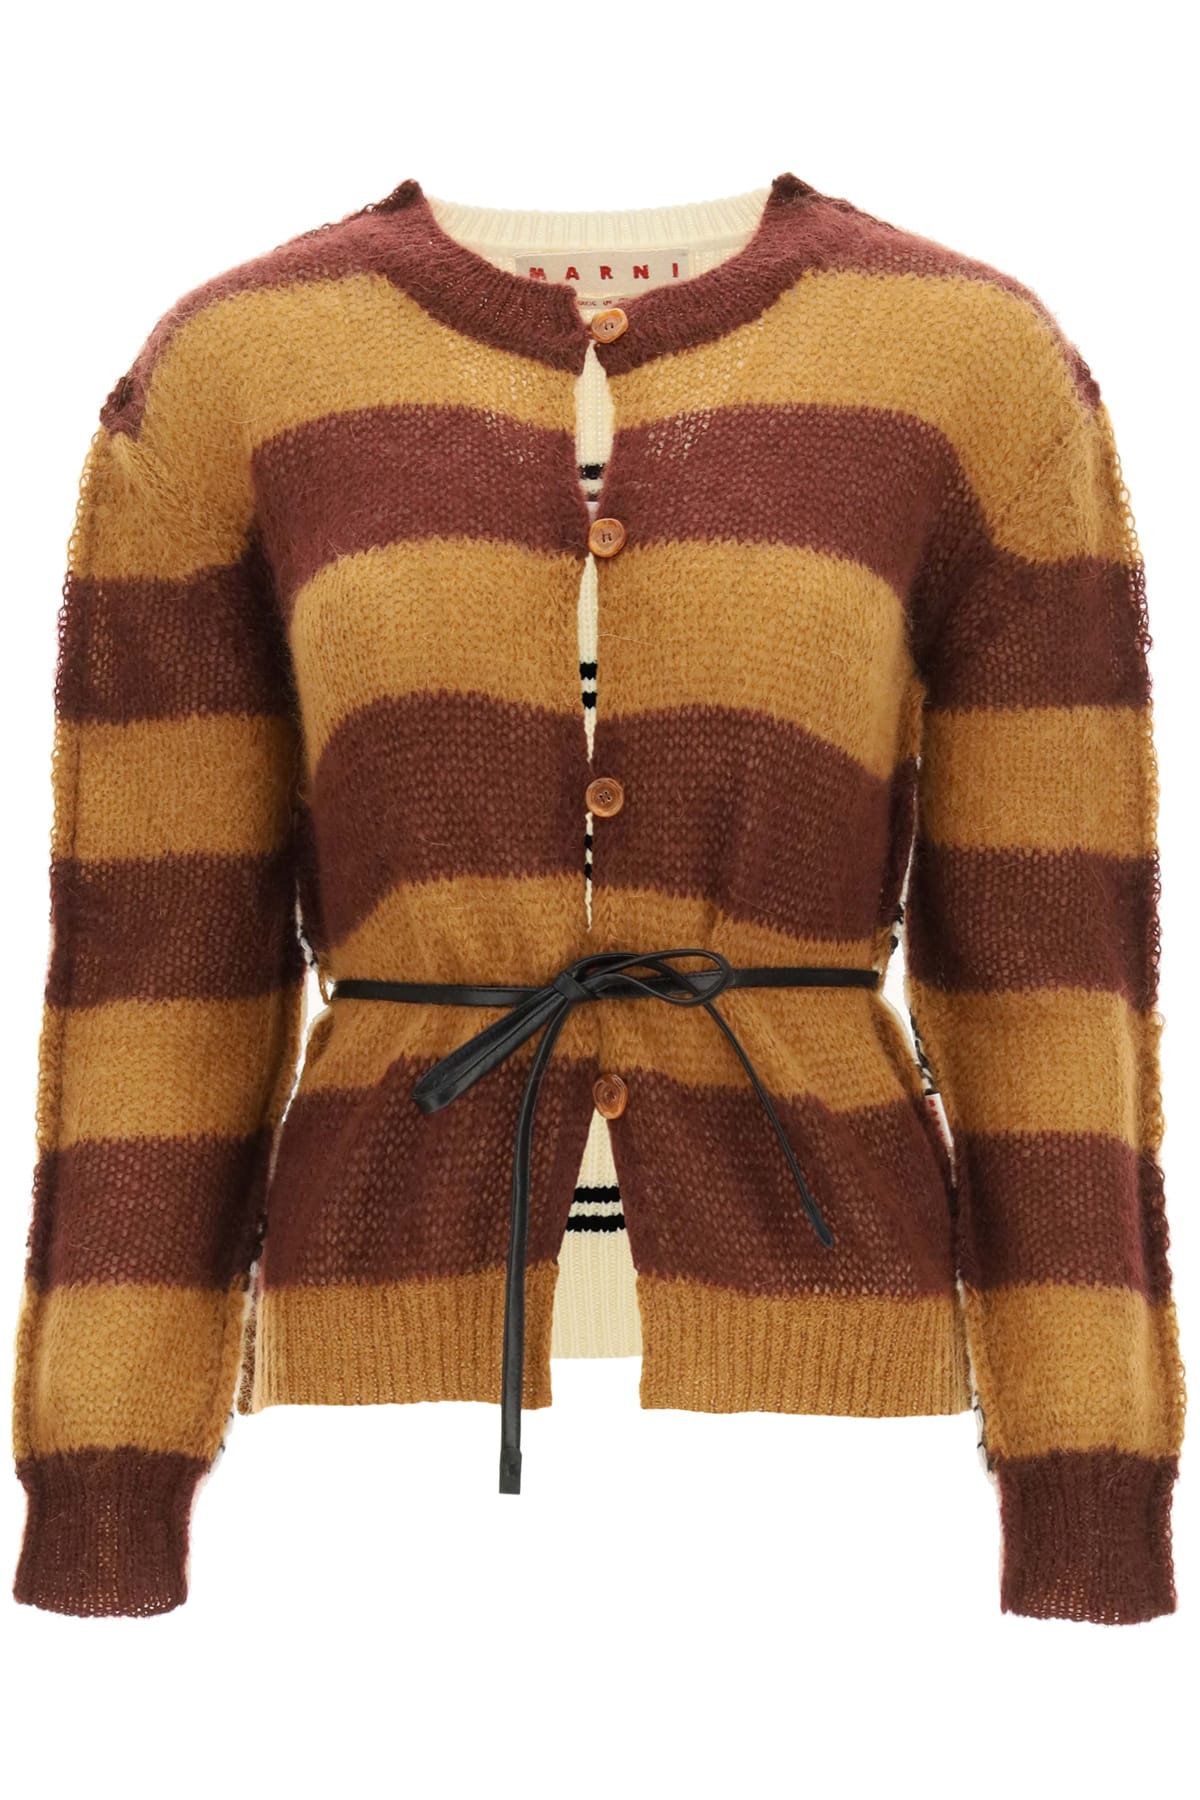 Marni Striped Cardigan In Wool And Mohair